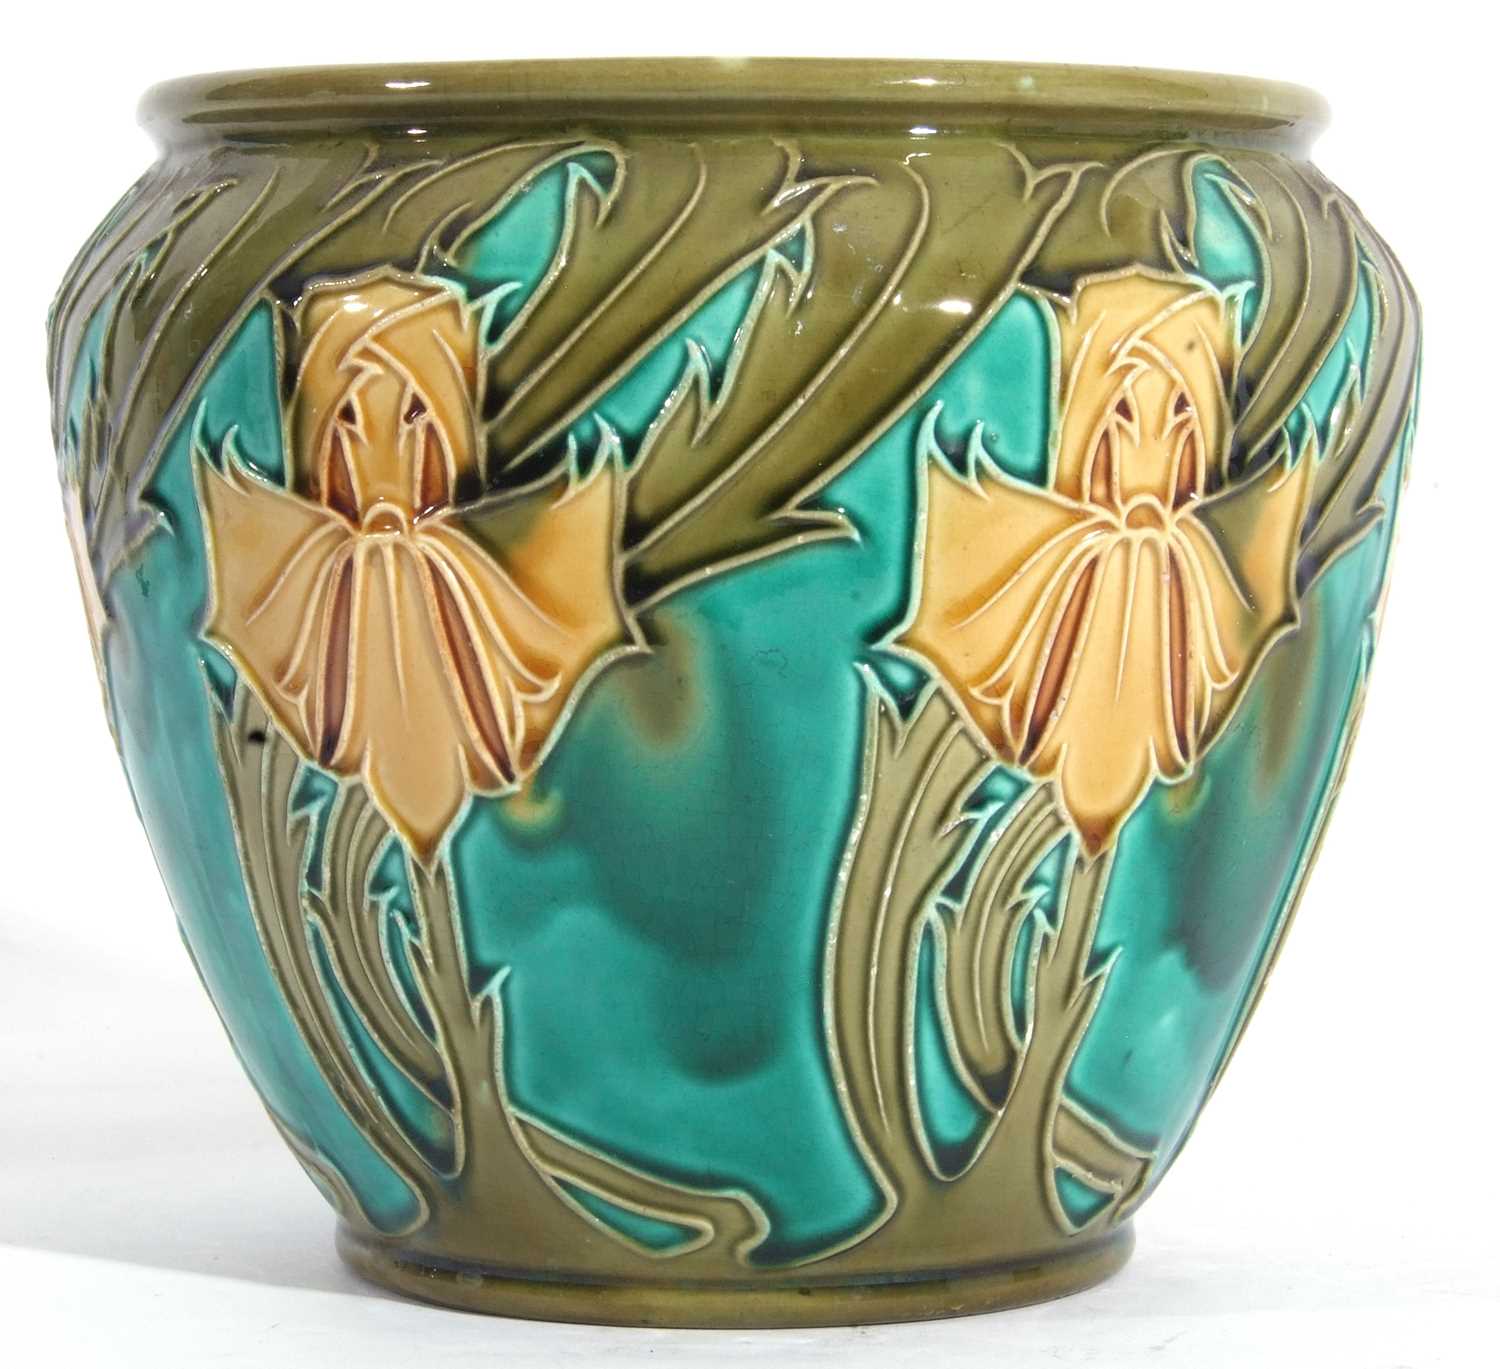 Minton Secessionist vase together with a Minton Secessionist jardiniere (crack to rim) (2) - Image 4 of 12